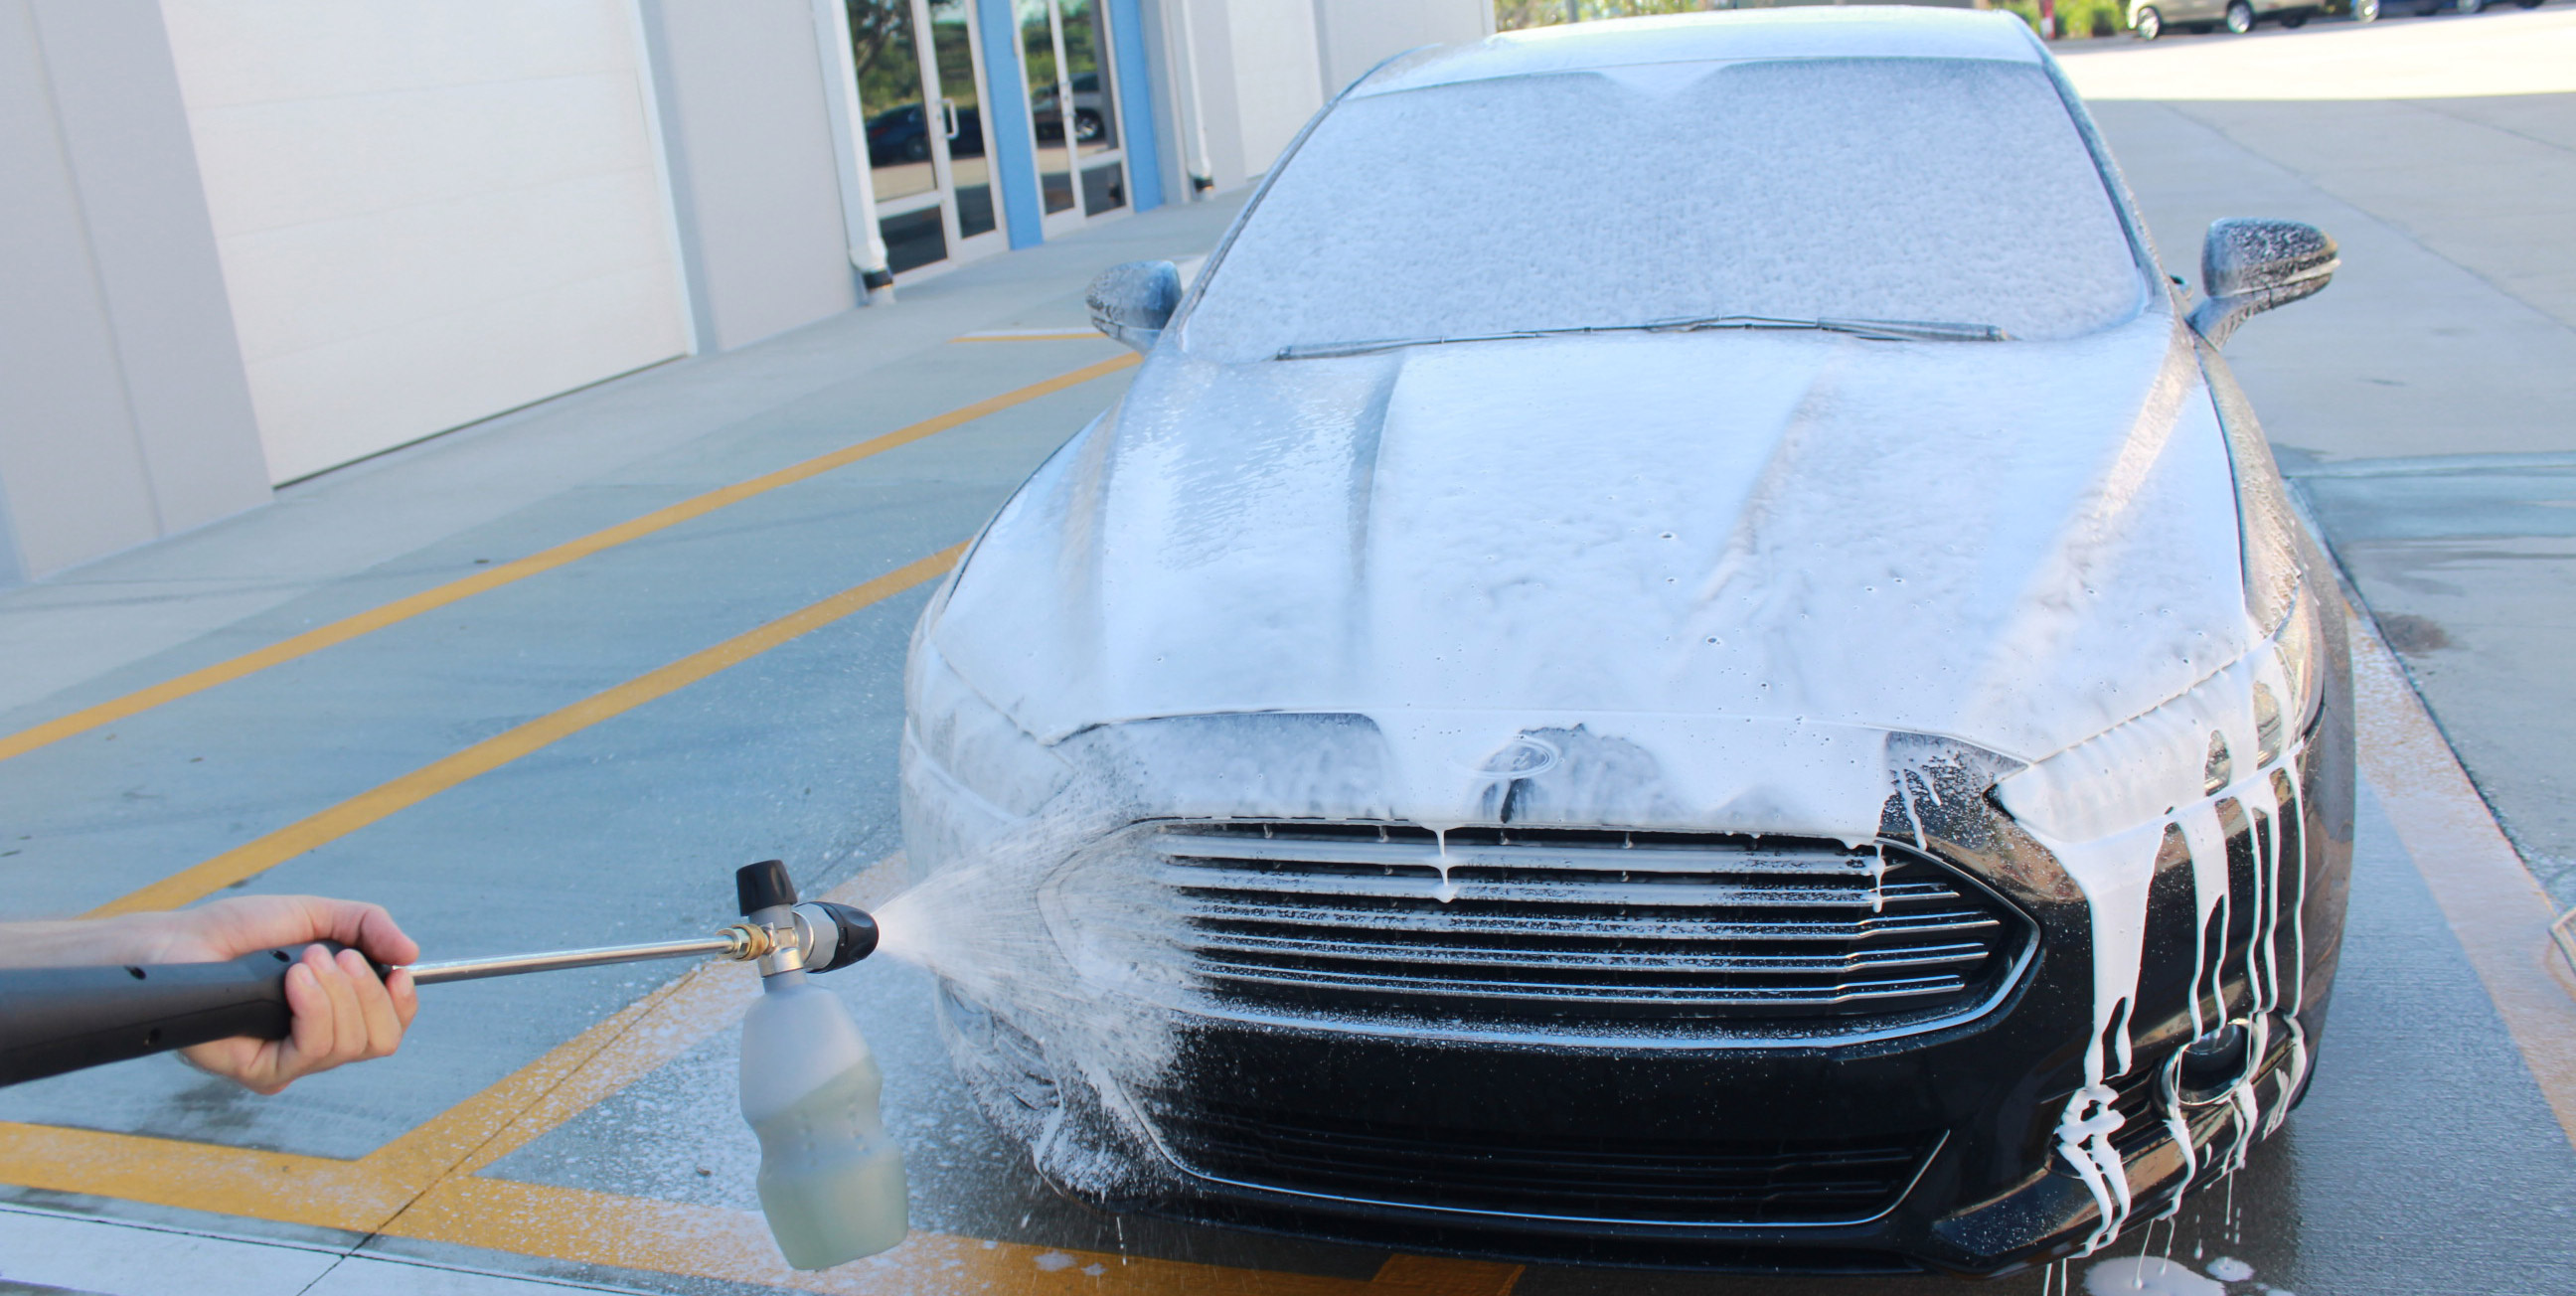 We are just going to spray and evenly coat the entire car surface with a thick helping of road grime stripping suds!